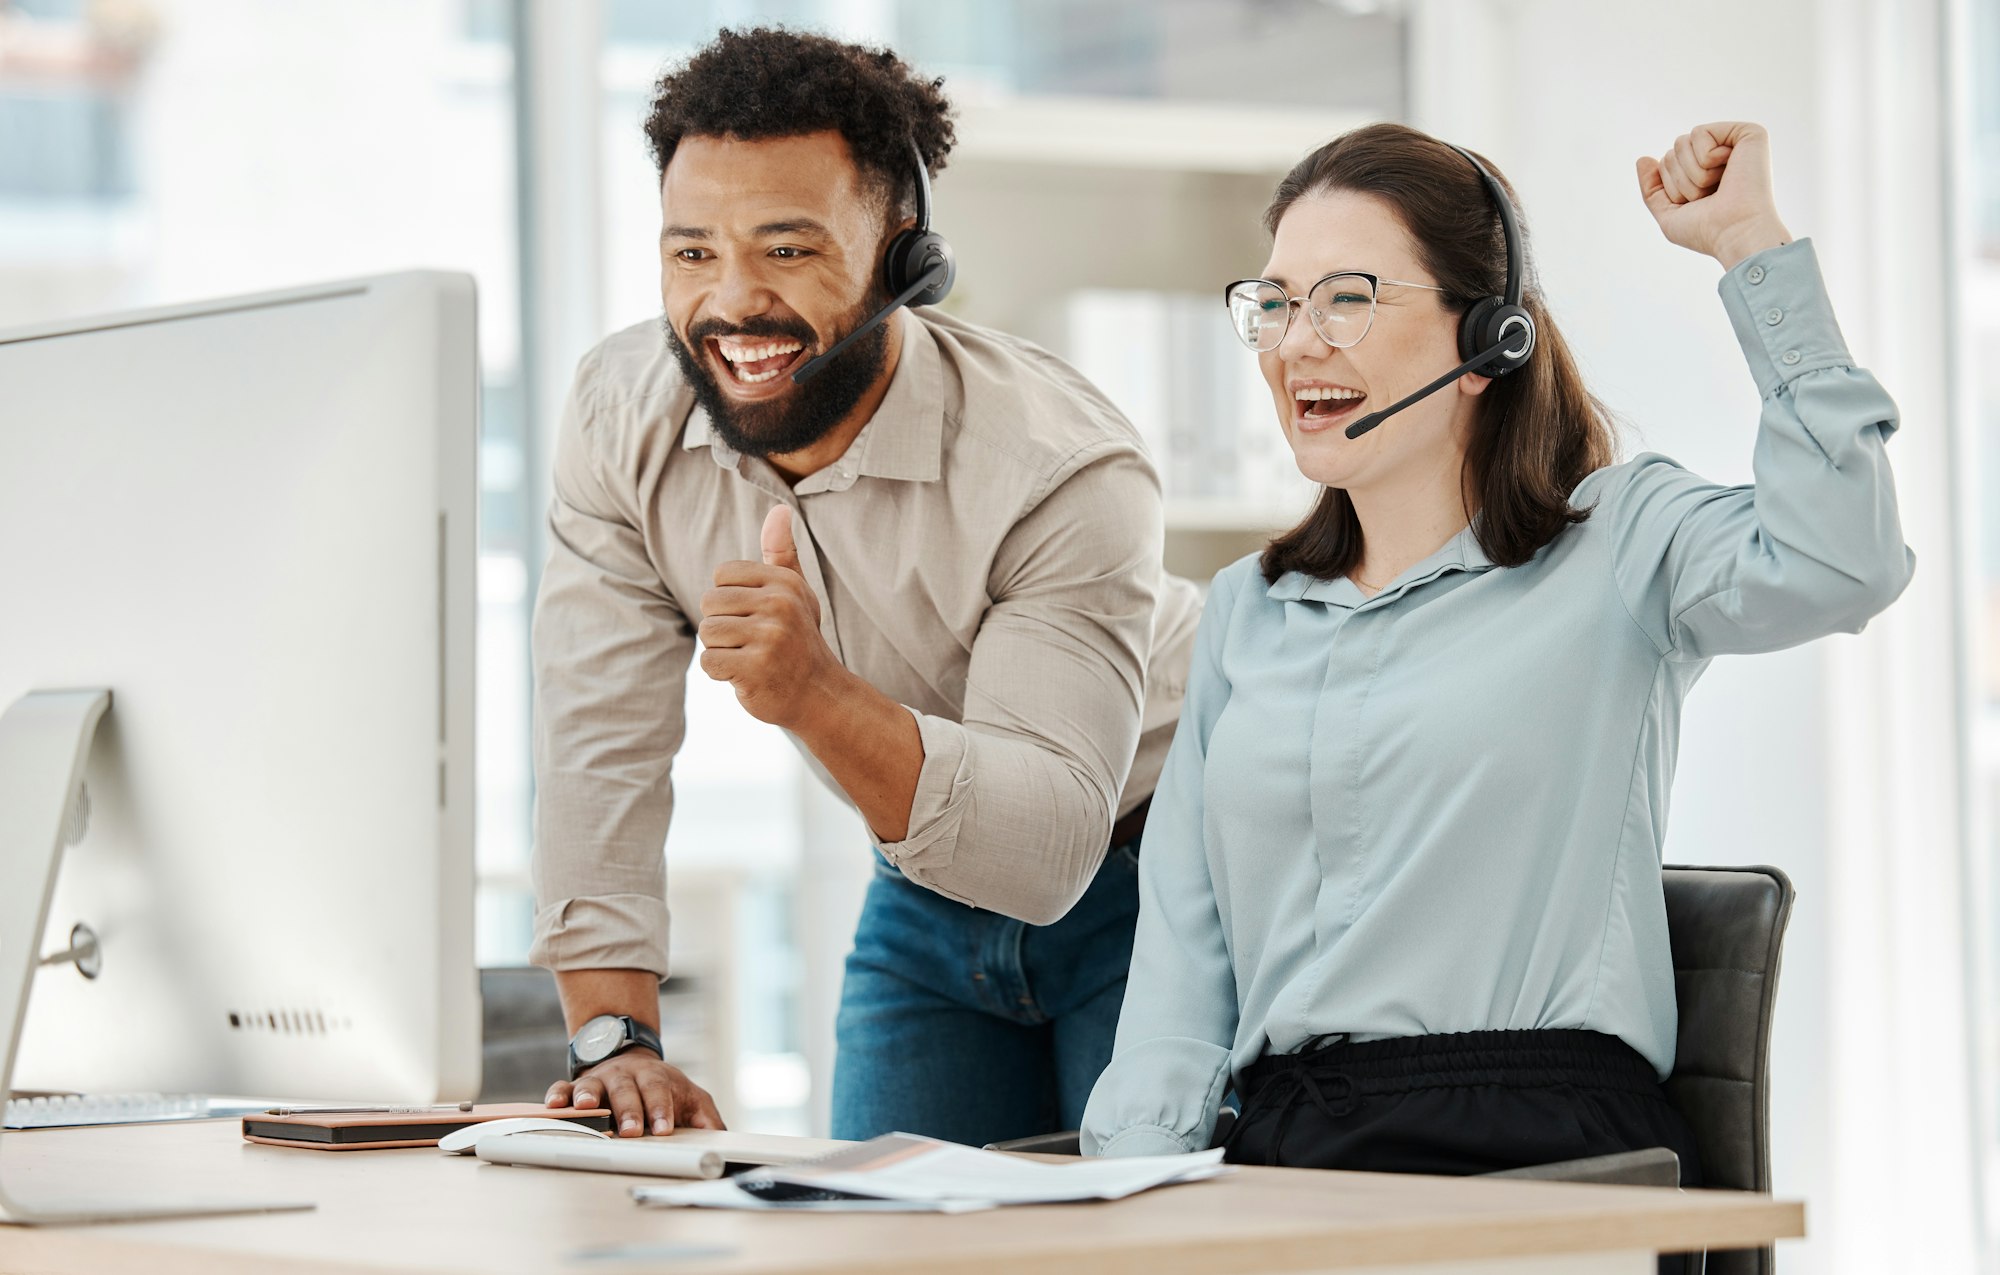 Crm customer support success and internet help workers celebration on a online consultation. Happy